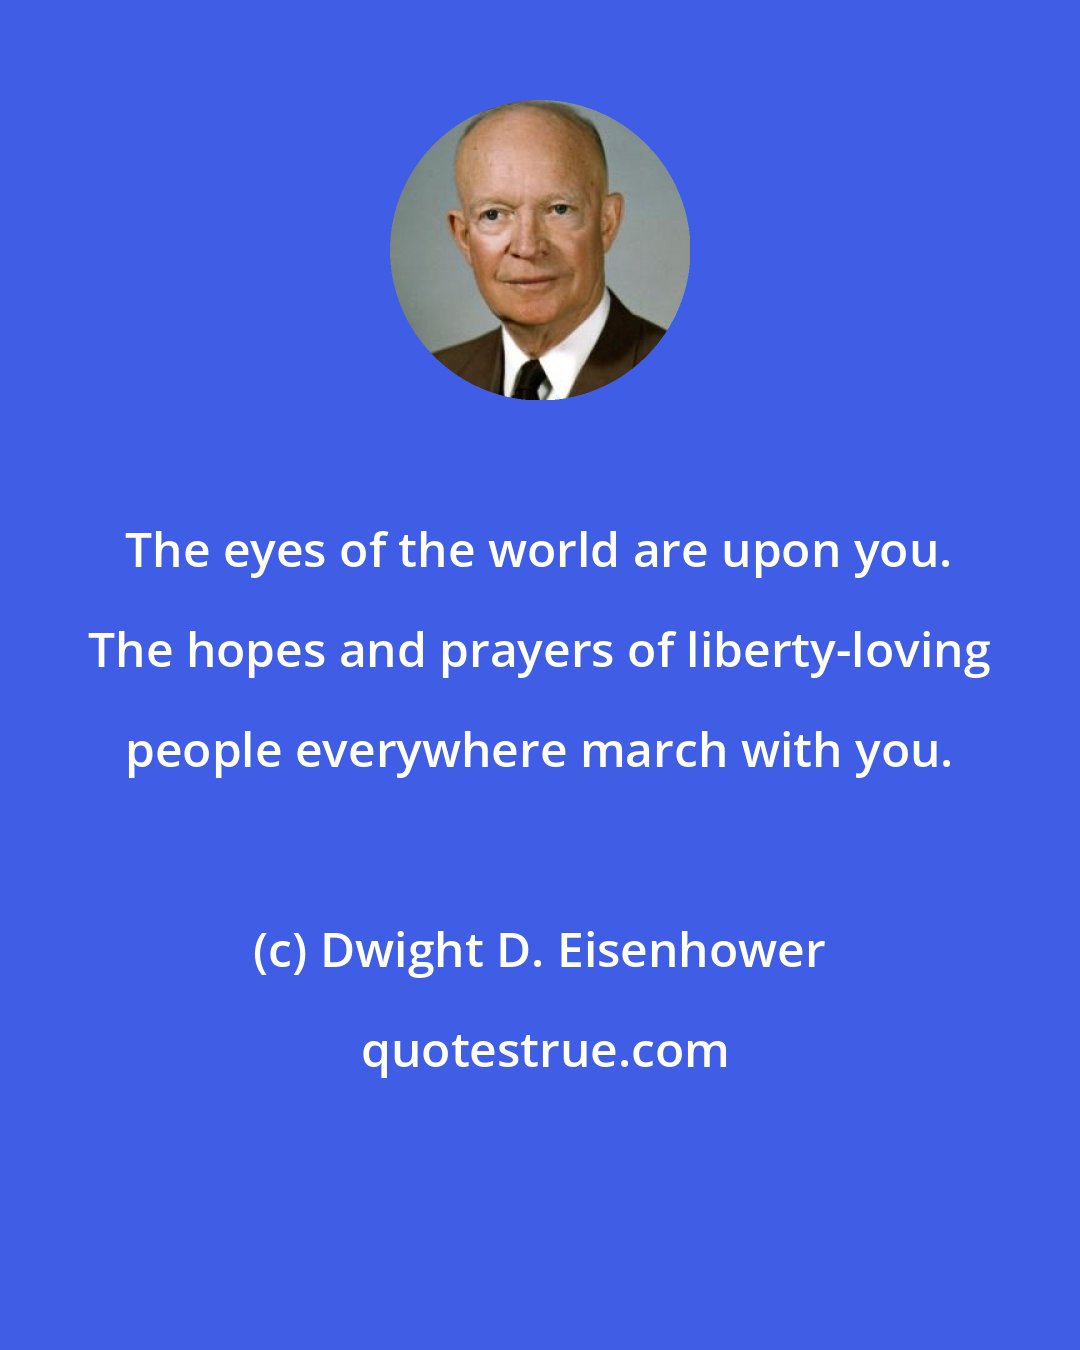 Dwight D. Eisenhower: The eyes of the world are upon you. The hopes and prayers of liberty-loving people everywhere march with you.